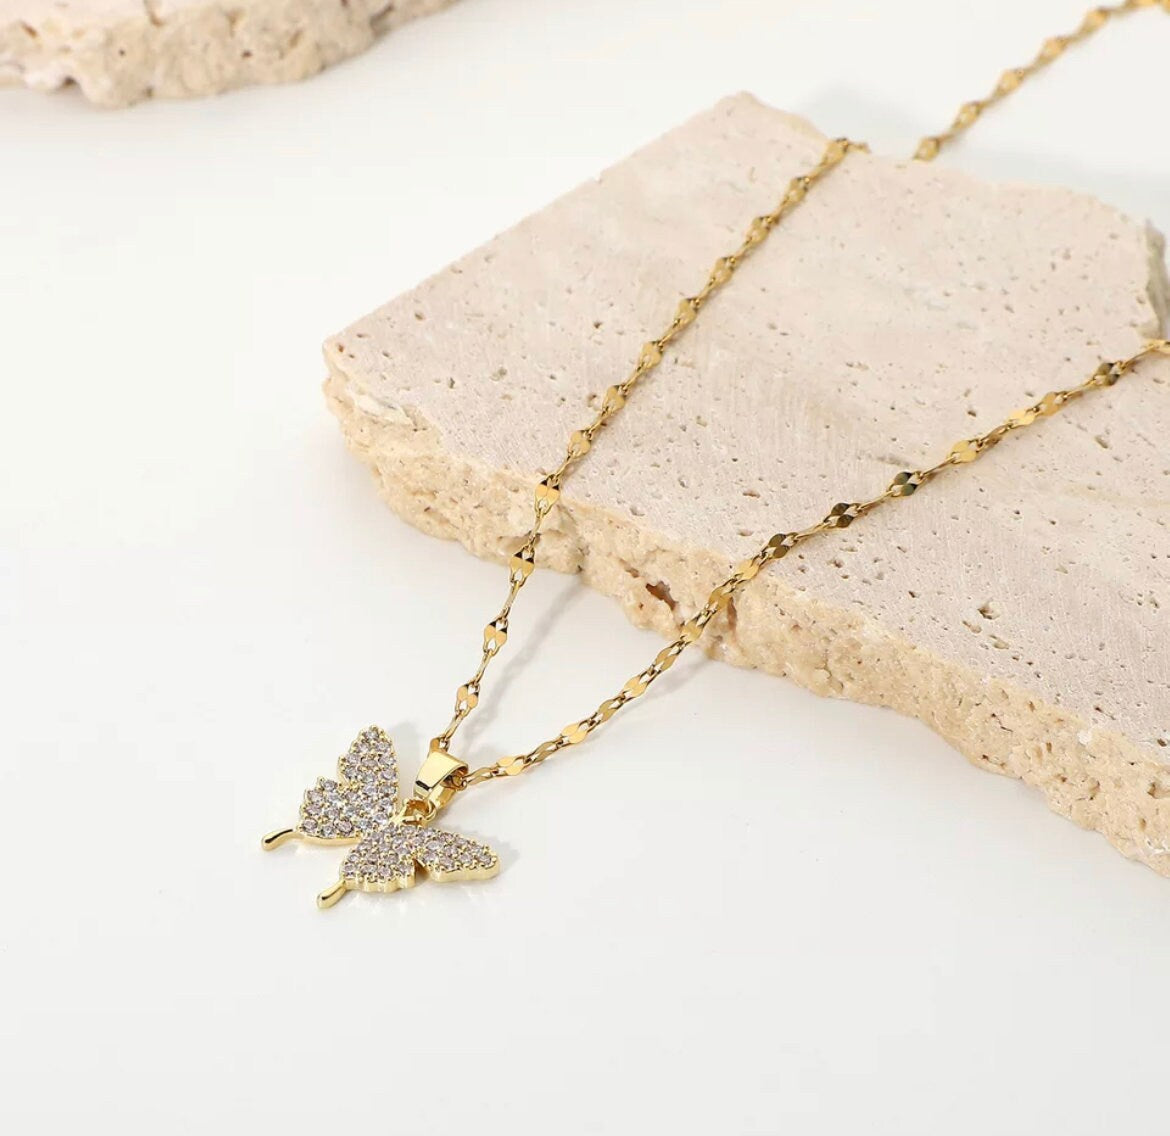 Dainty Gold Cz Butterfly Pendent Necklace-Butterfly Necklace-Butterfly Pendant-Butterfly Jewellery-18K Gold Butterfly Necklace-Gift For Her